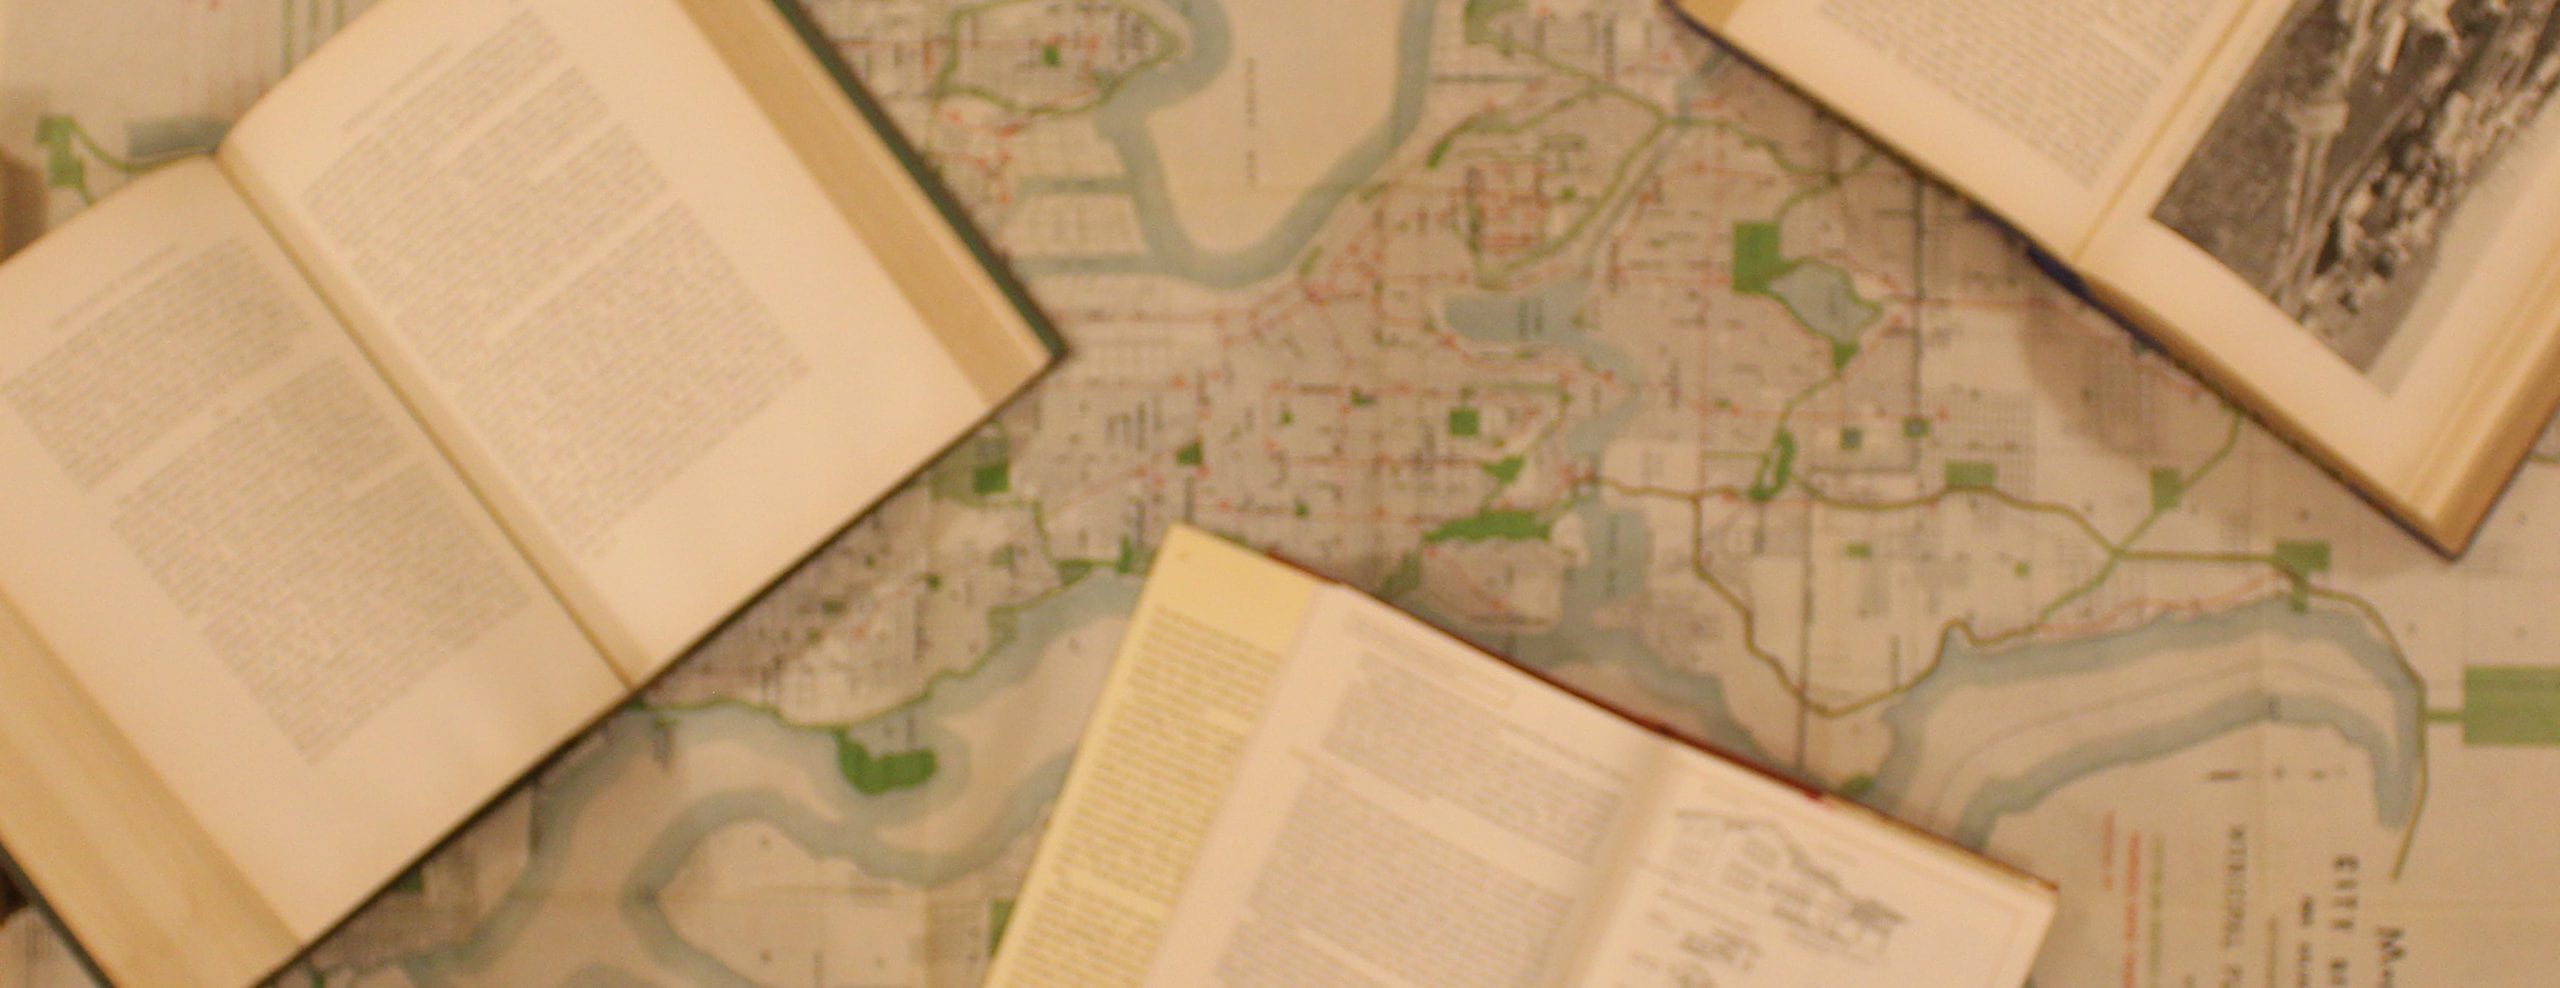 Three open books are laid out over a map of Seattle.